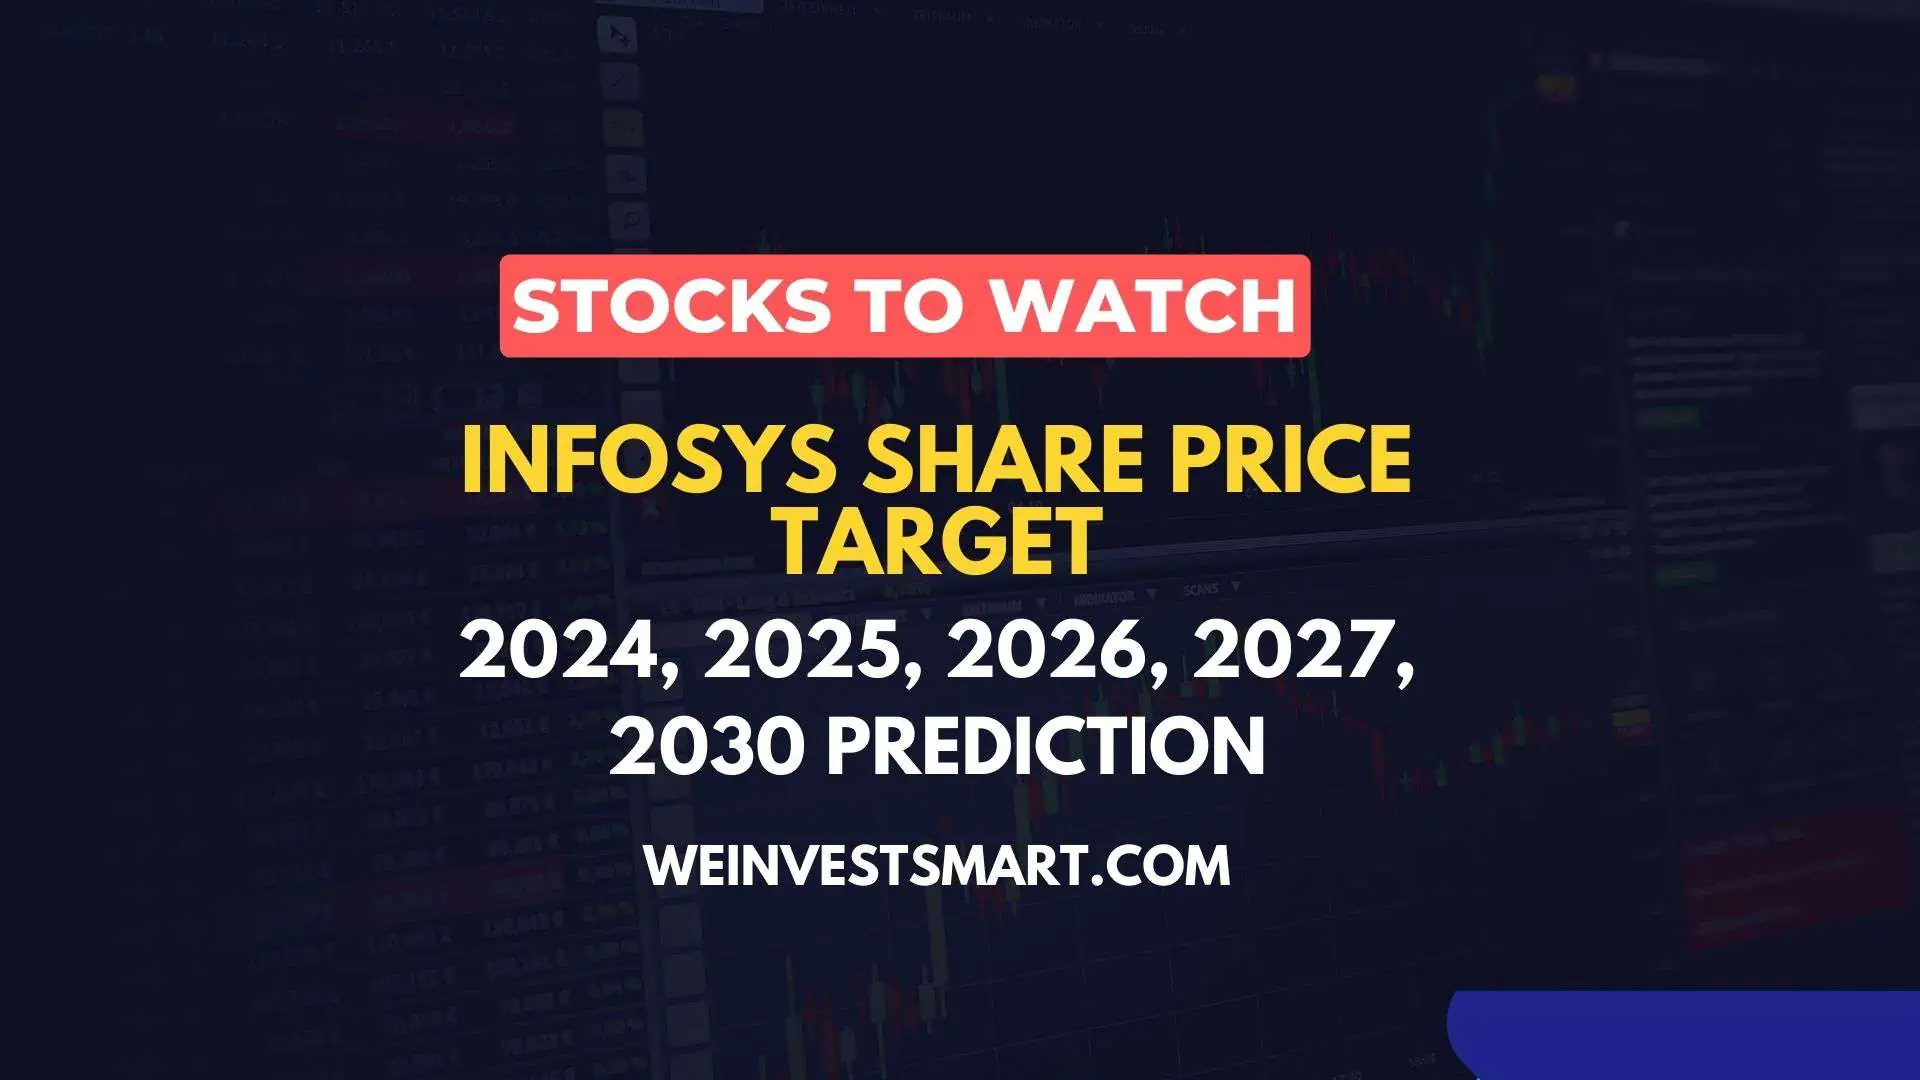 Infosys Share Price Target 2024, 2025, 2026, 2027, 2030 Prediction Buy